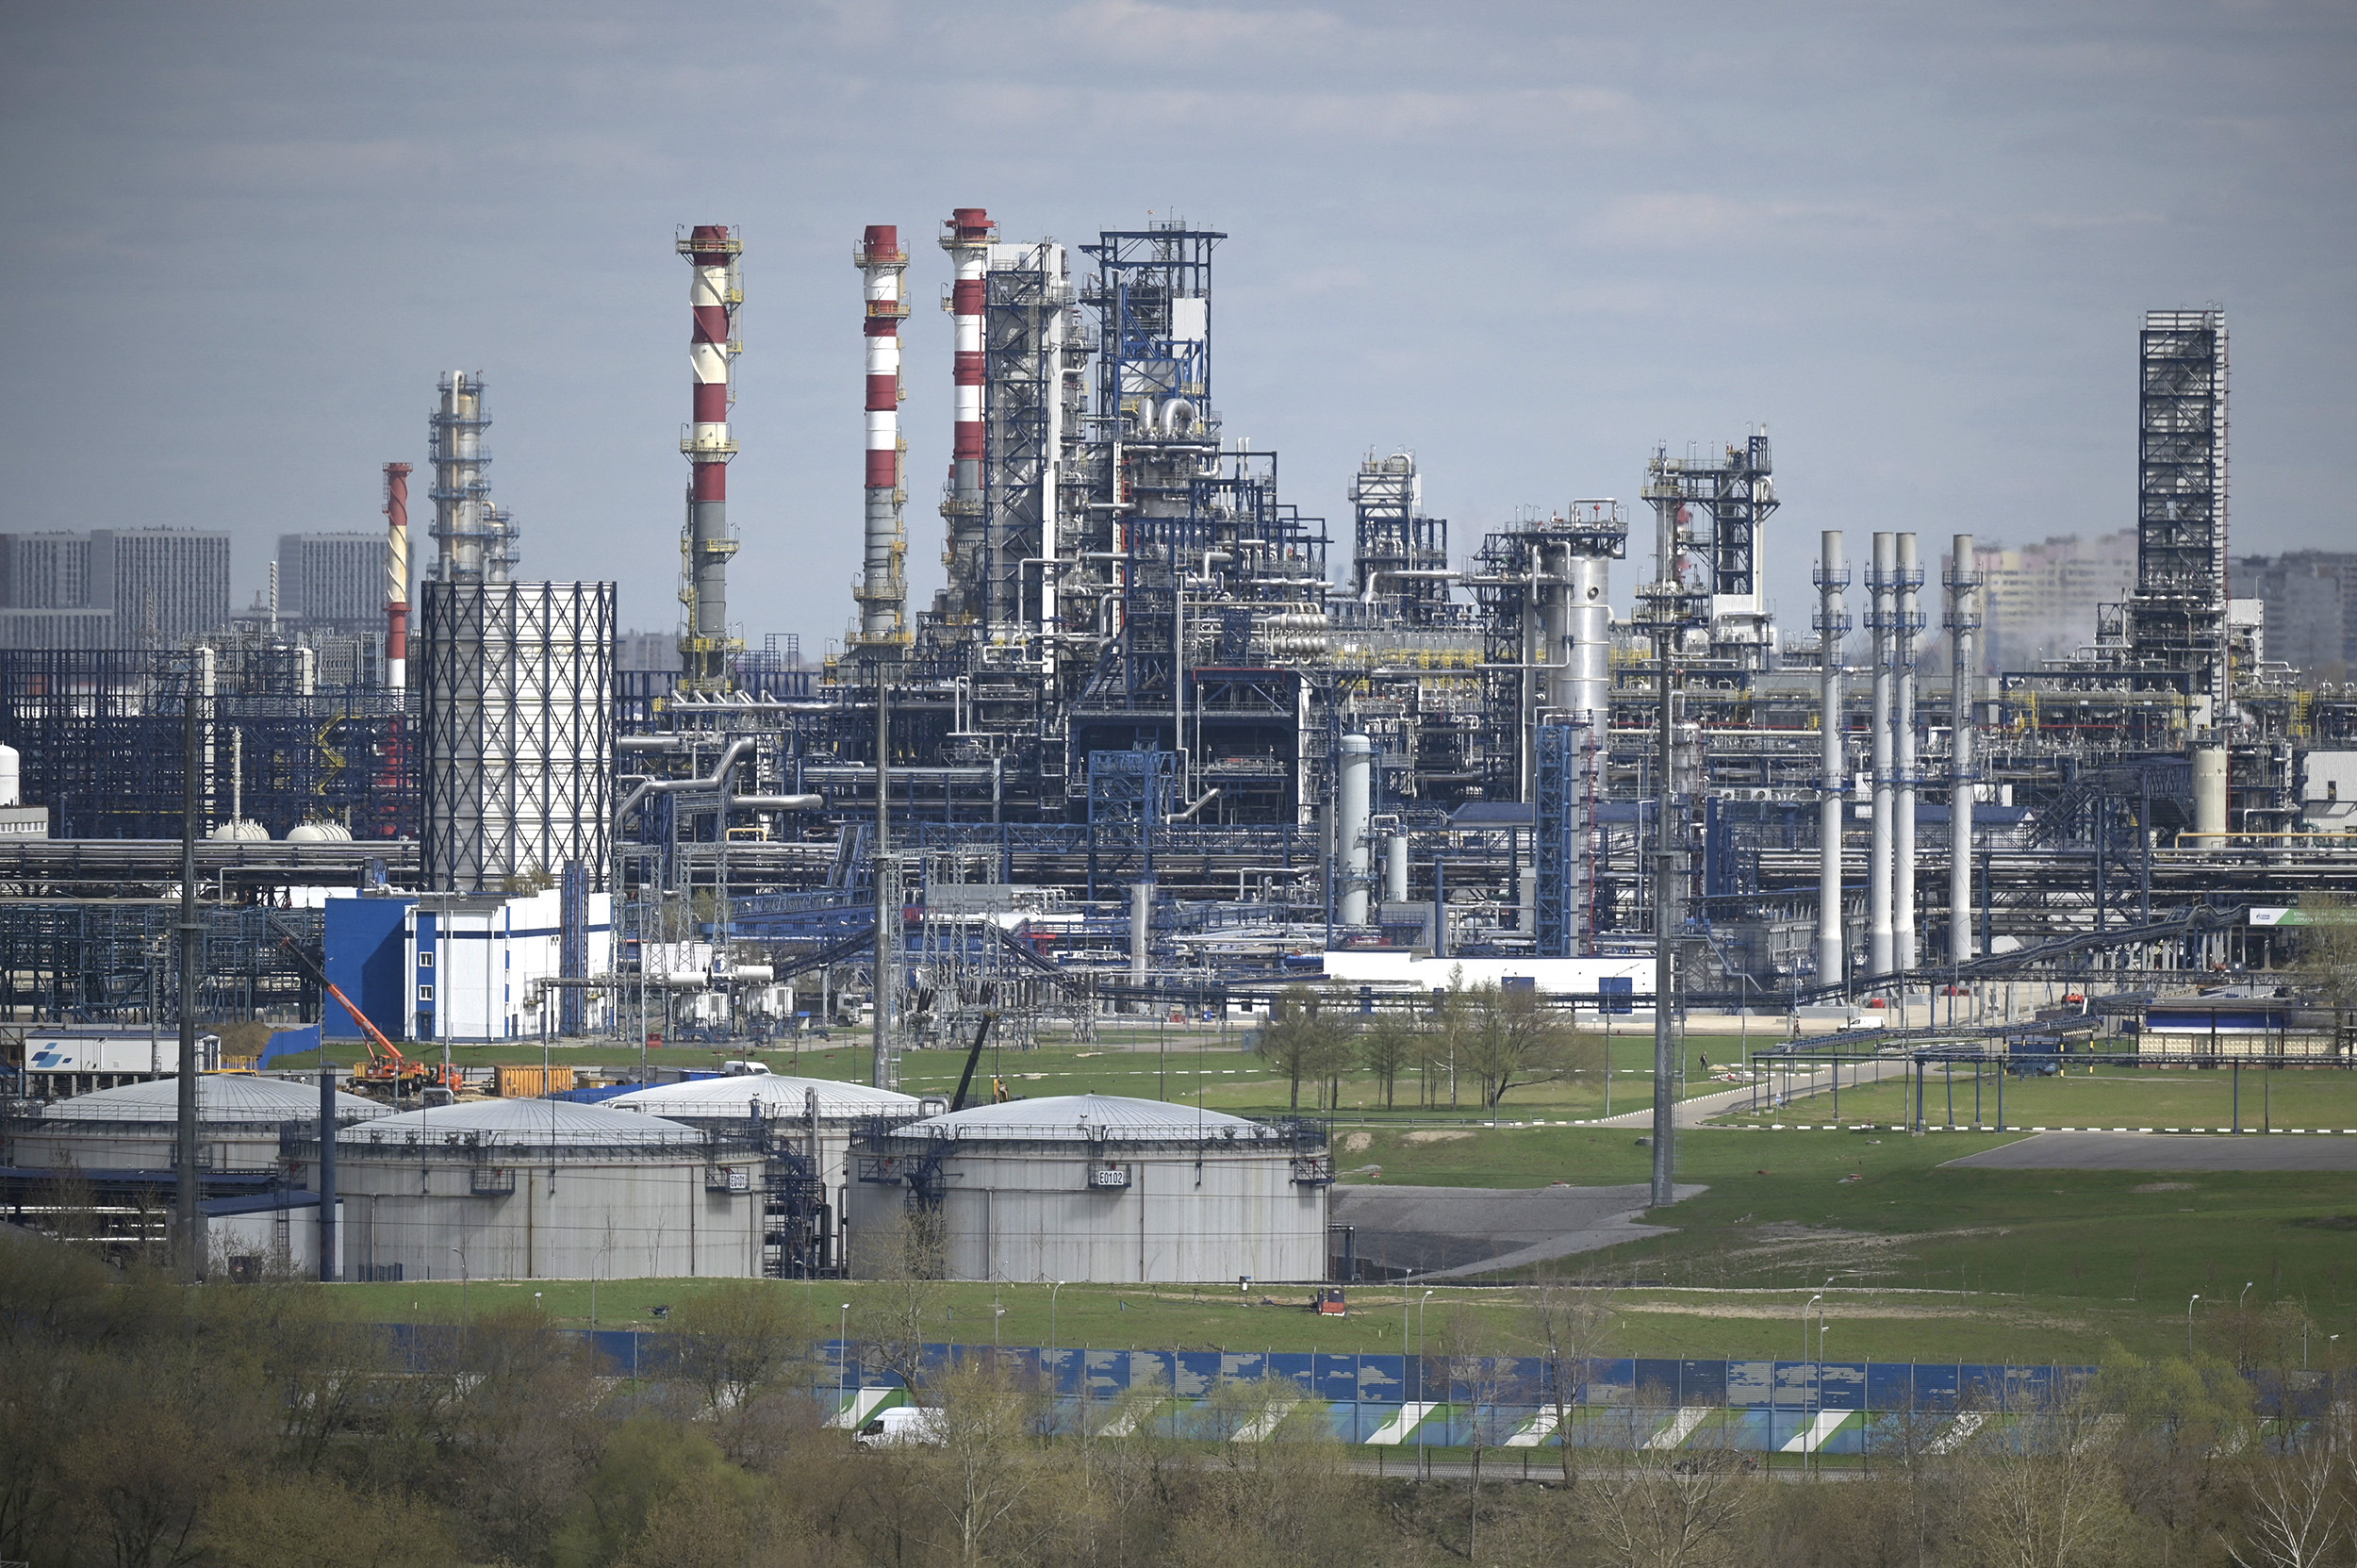 Russian oil producer Gazprom Neft's Moscow oil refinery on the southeastern outskirts of Moscow, Russia, on April 28.